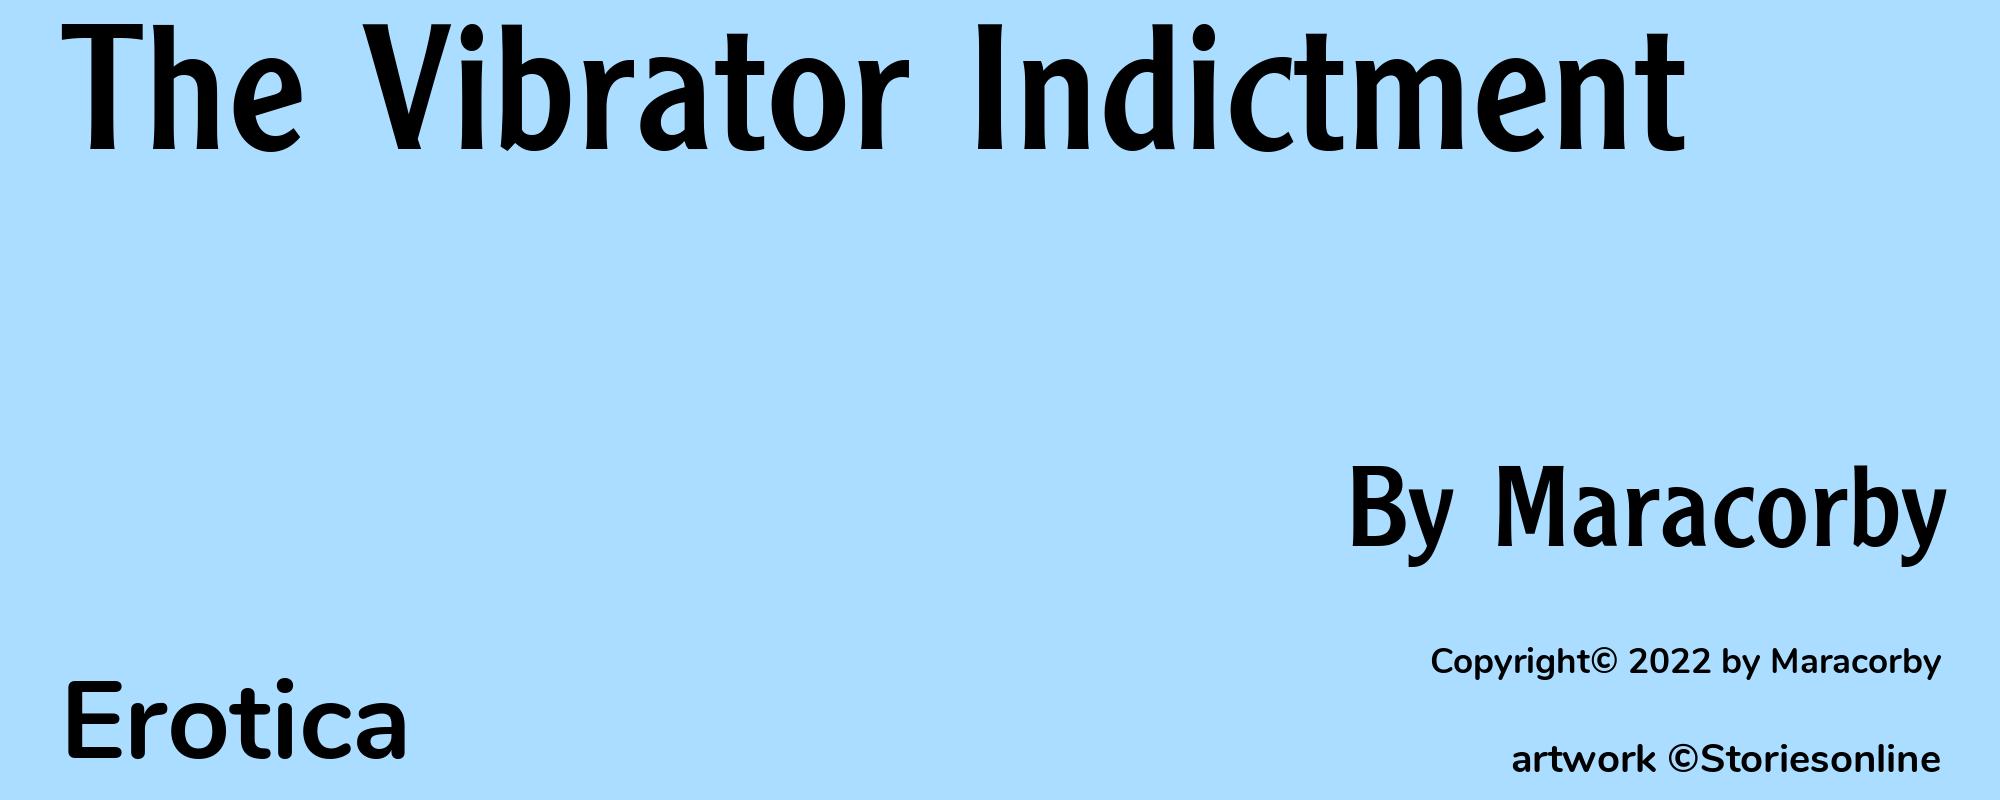 The Vibrator Indictment - Cover